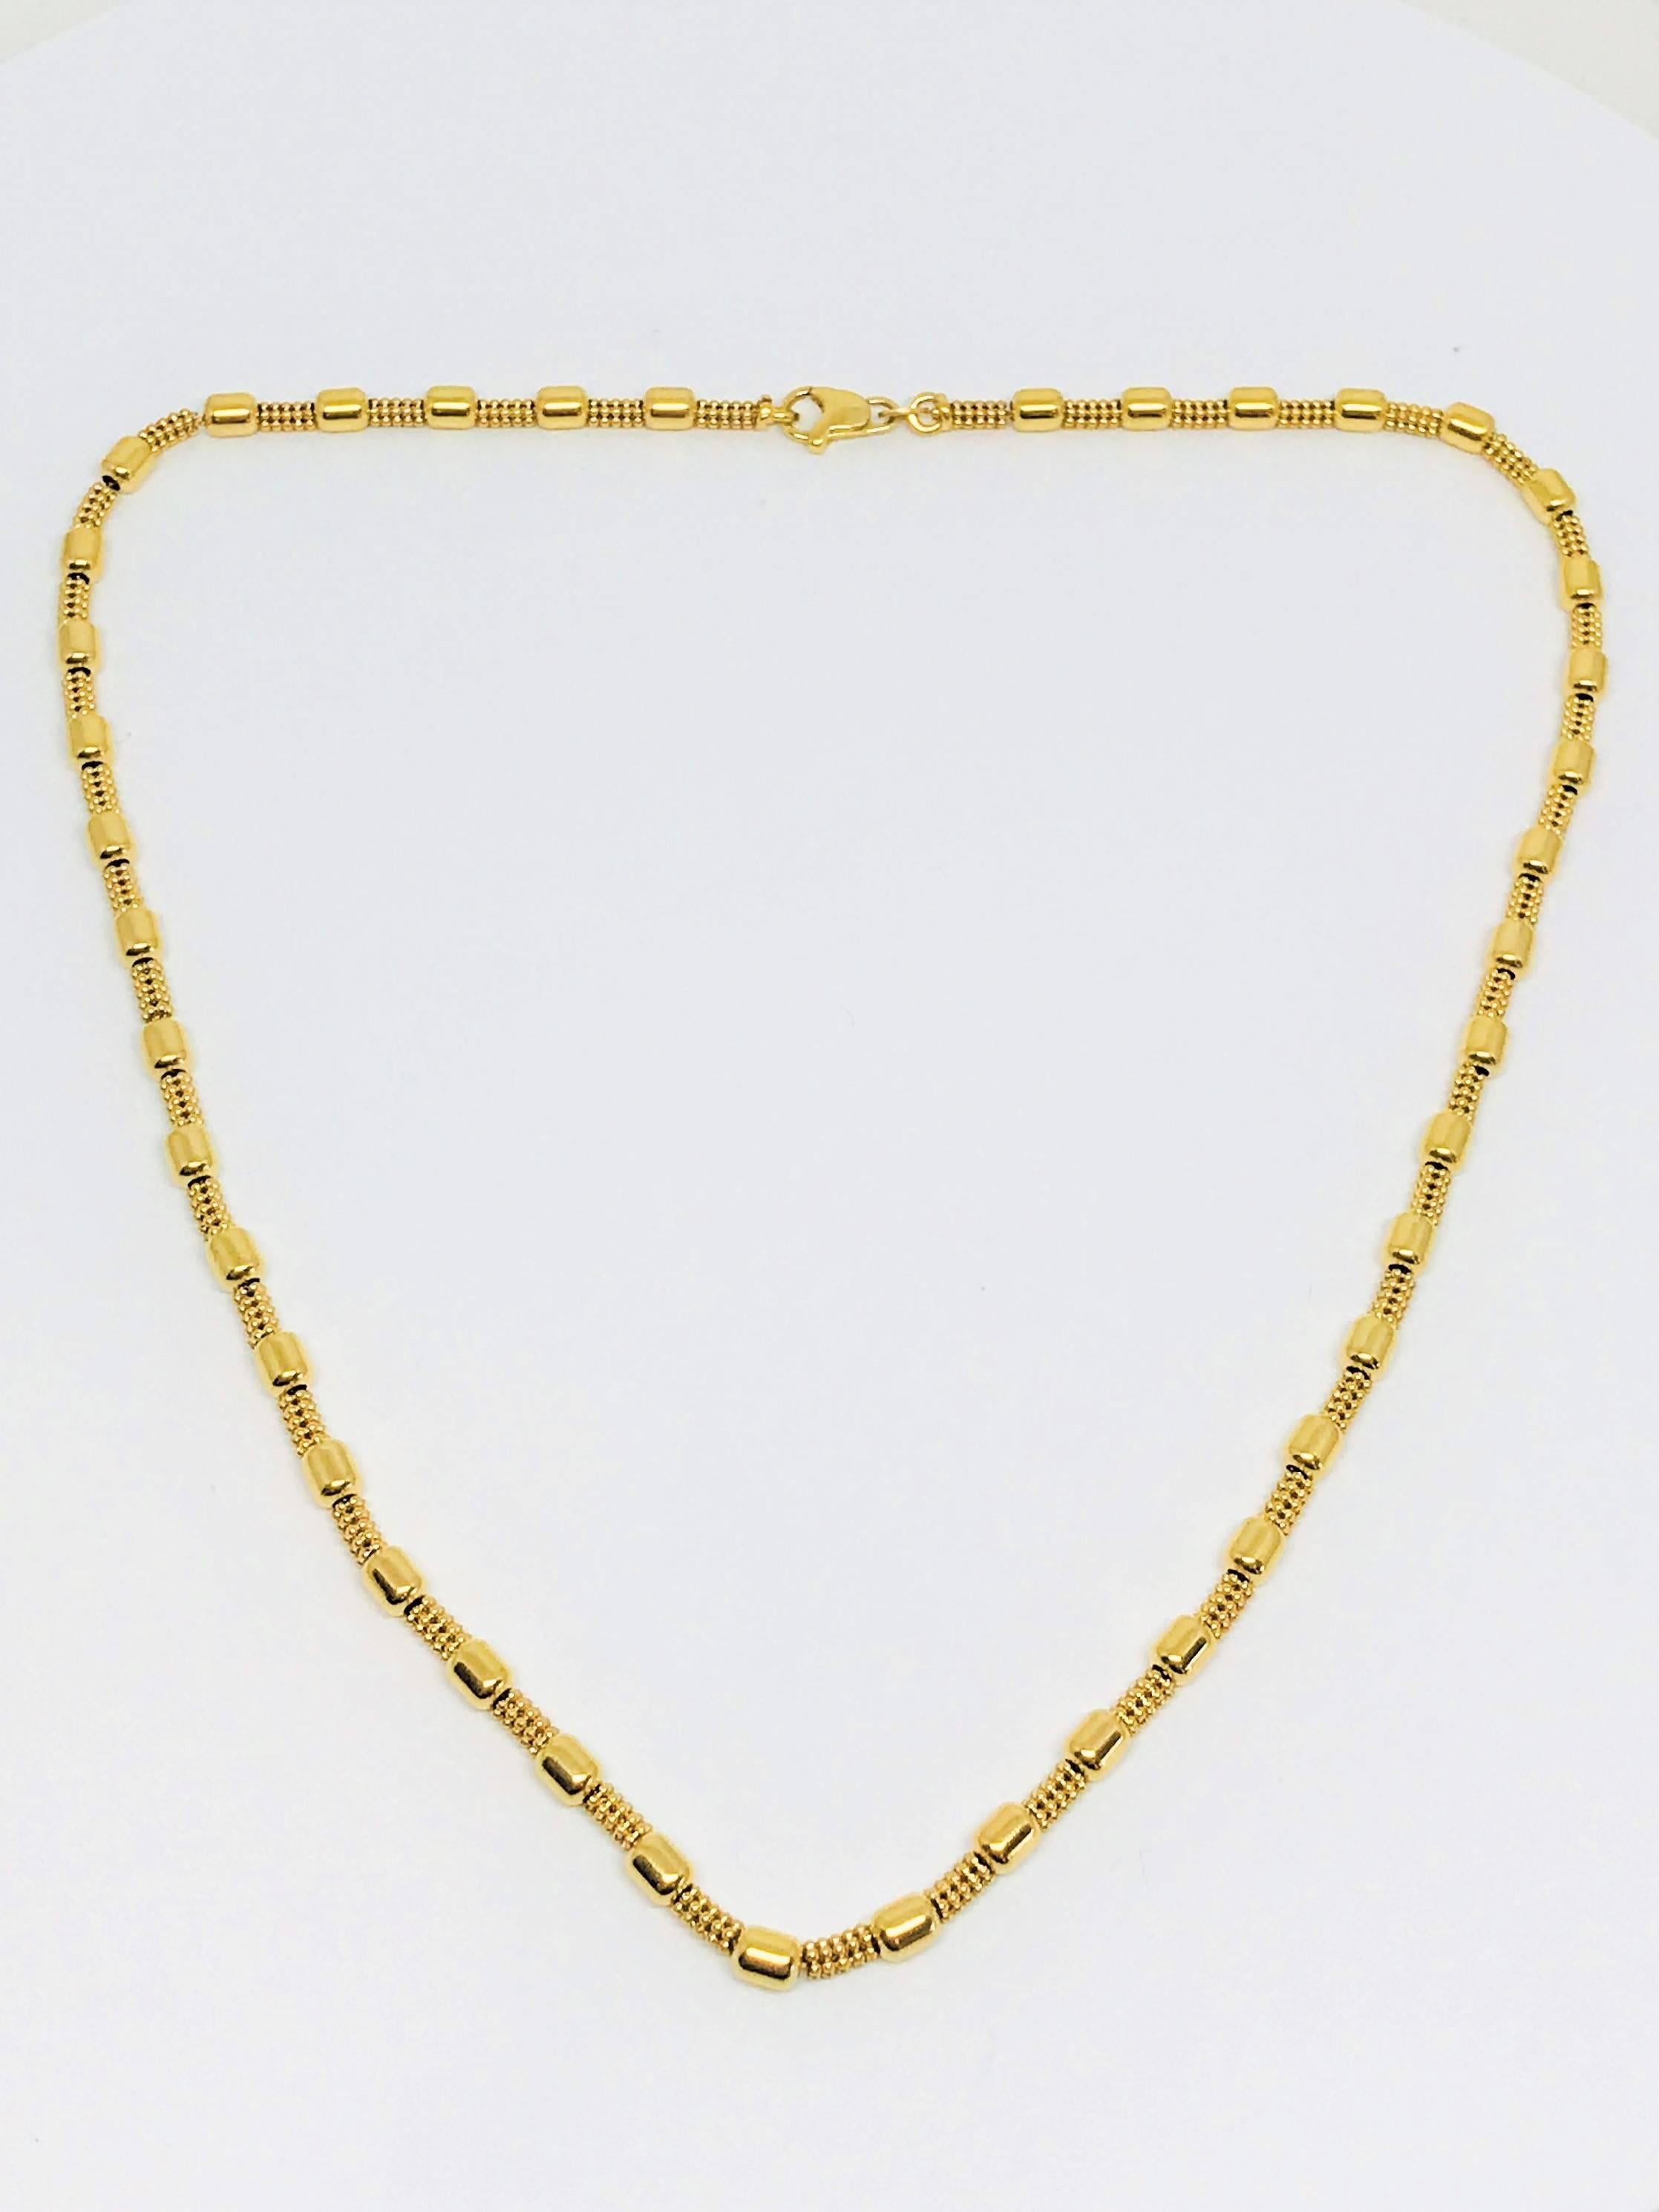 Modern 18 Karat Yellow Gold Fancy Bead Chain Necklace For Sale